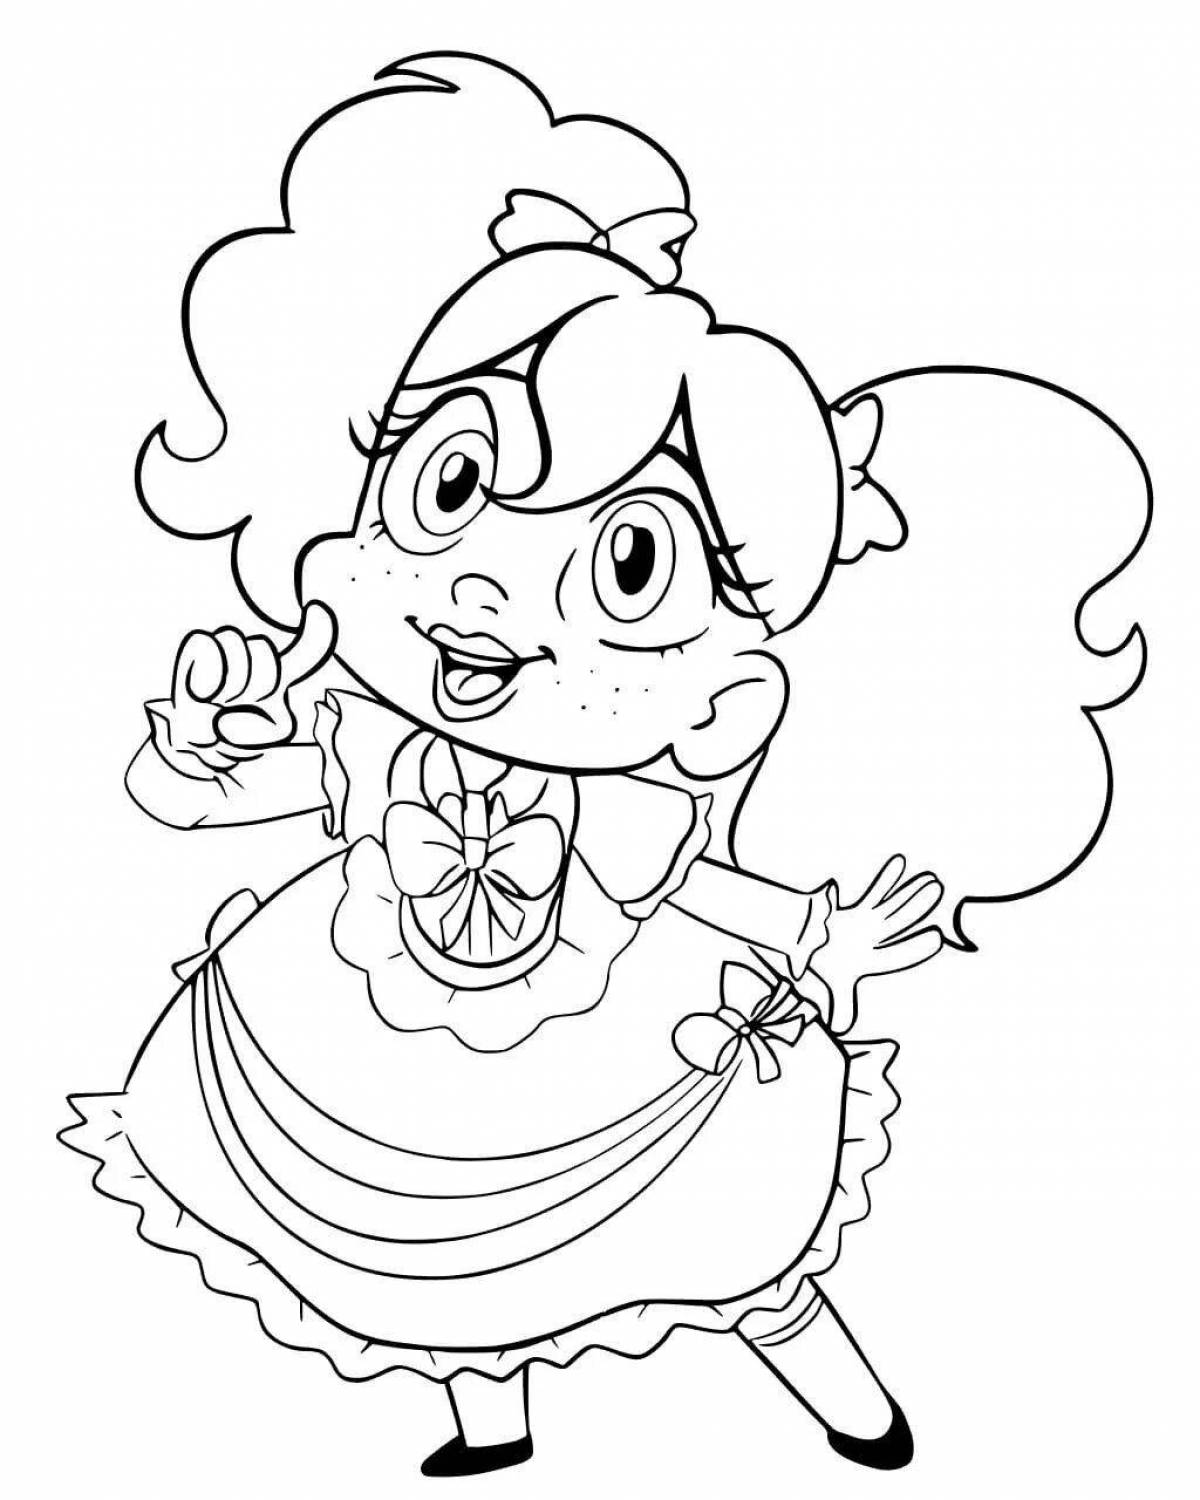 Coloring page dainty poppy doll